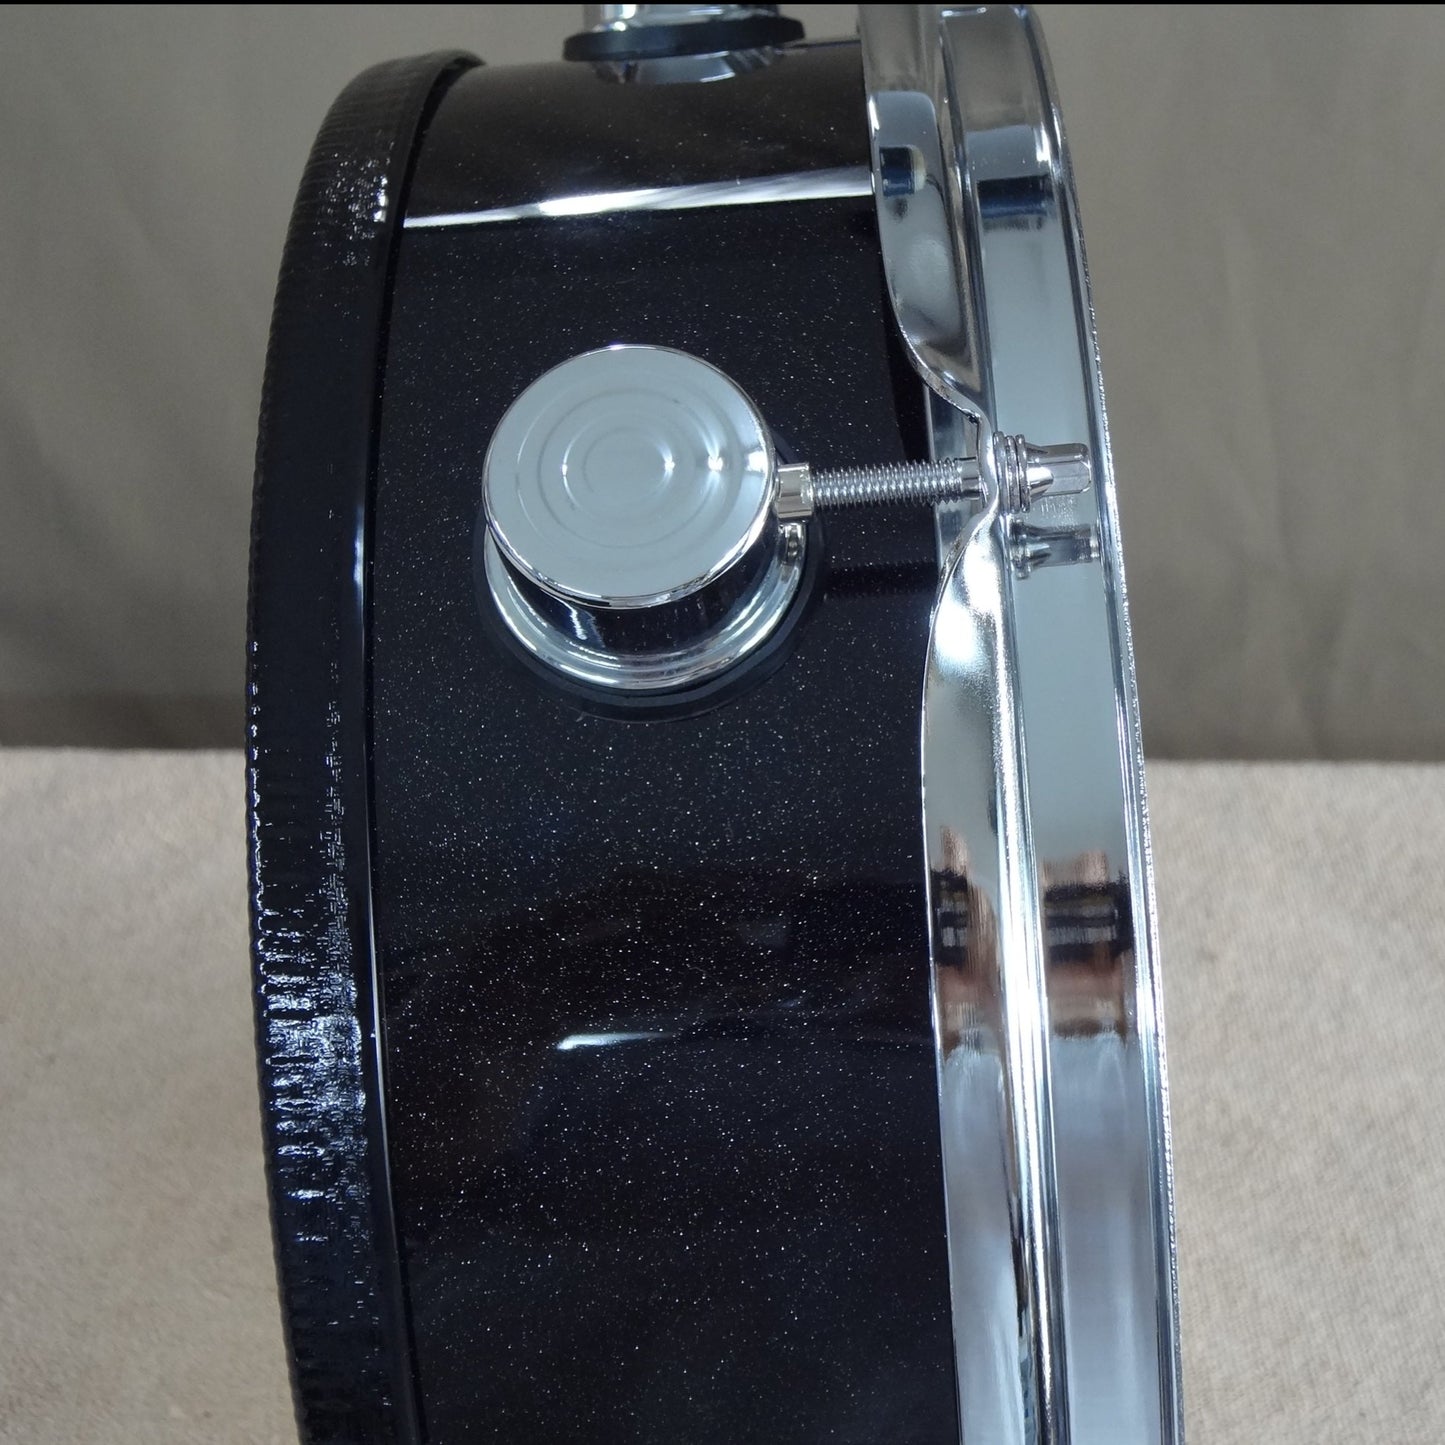 New 13 Inch Custom Electronic Snare Drum - Black with Slight Sparkle